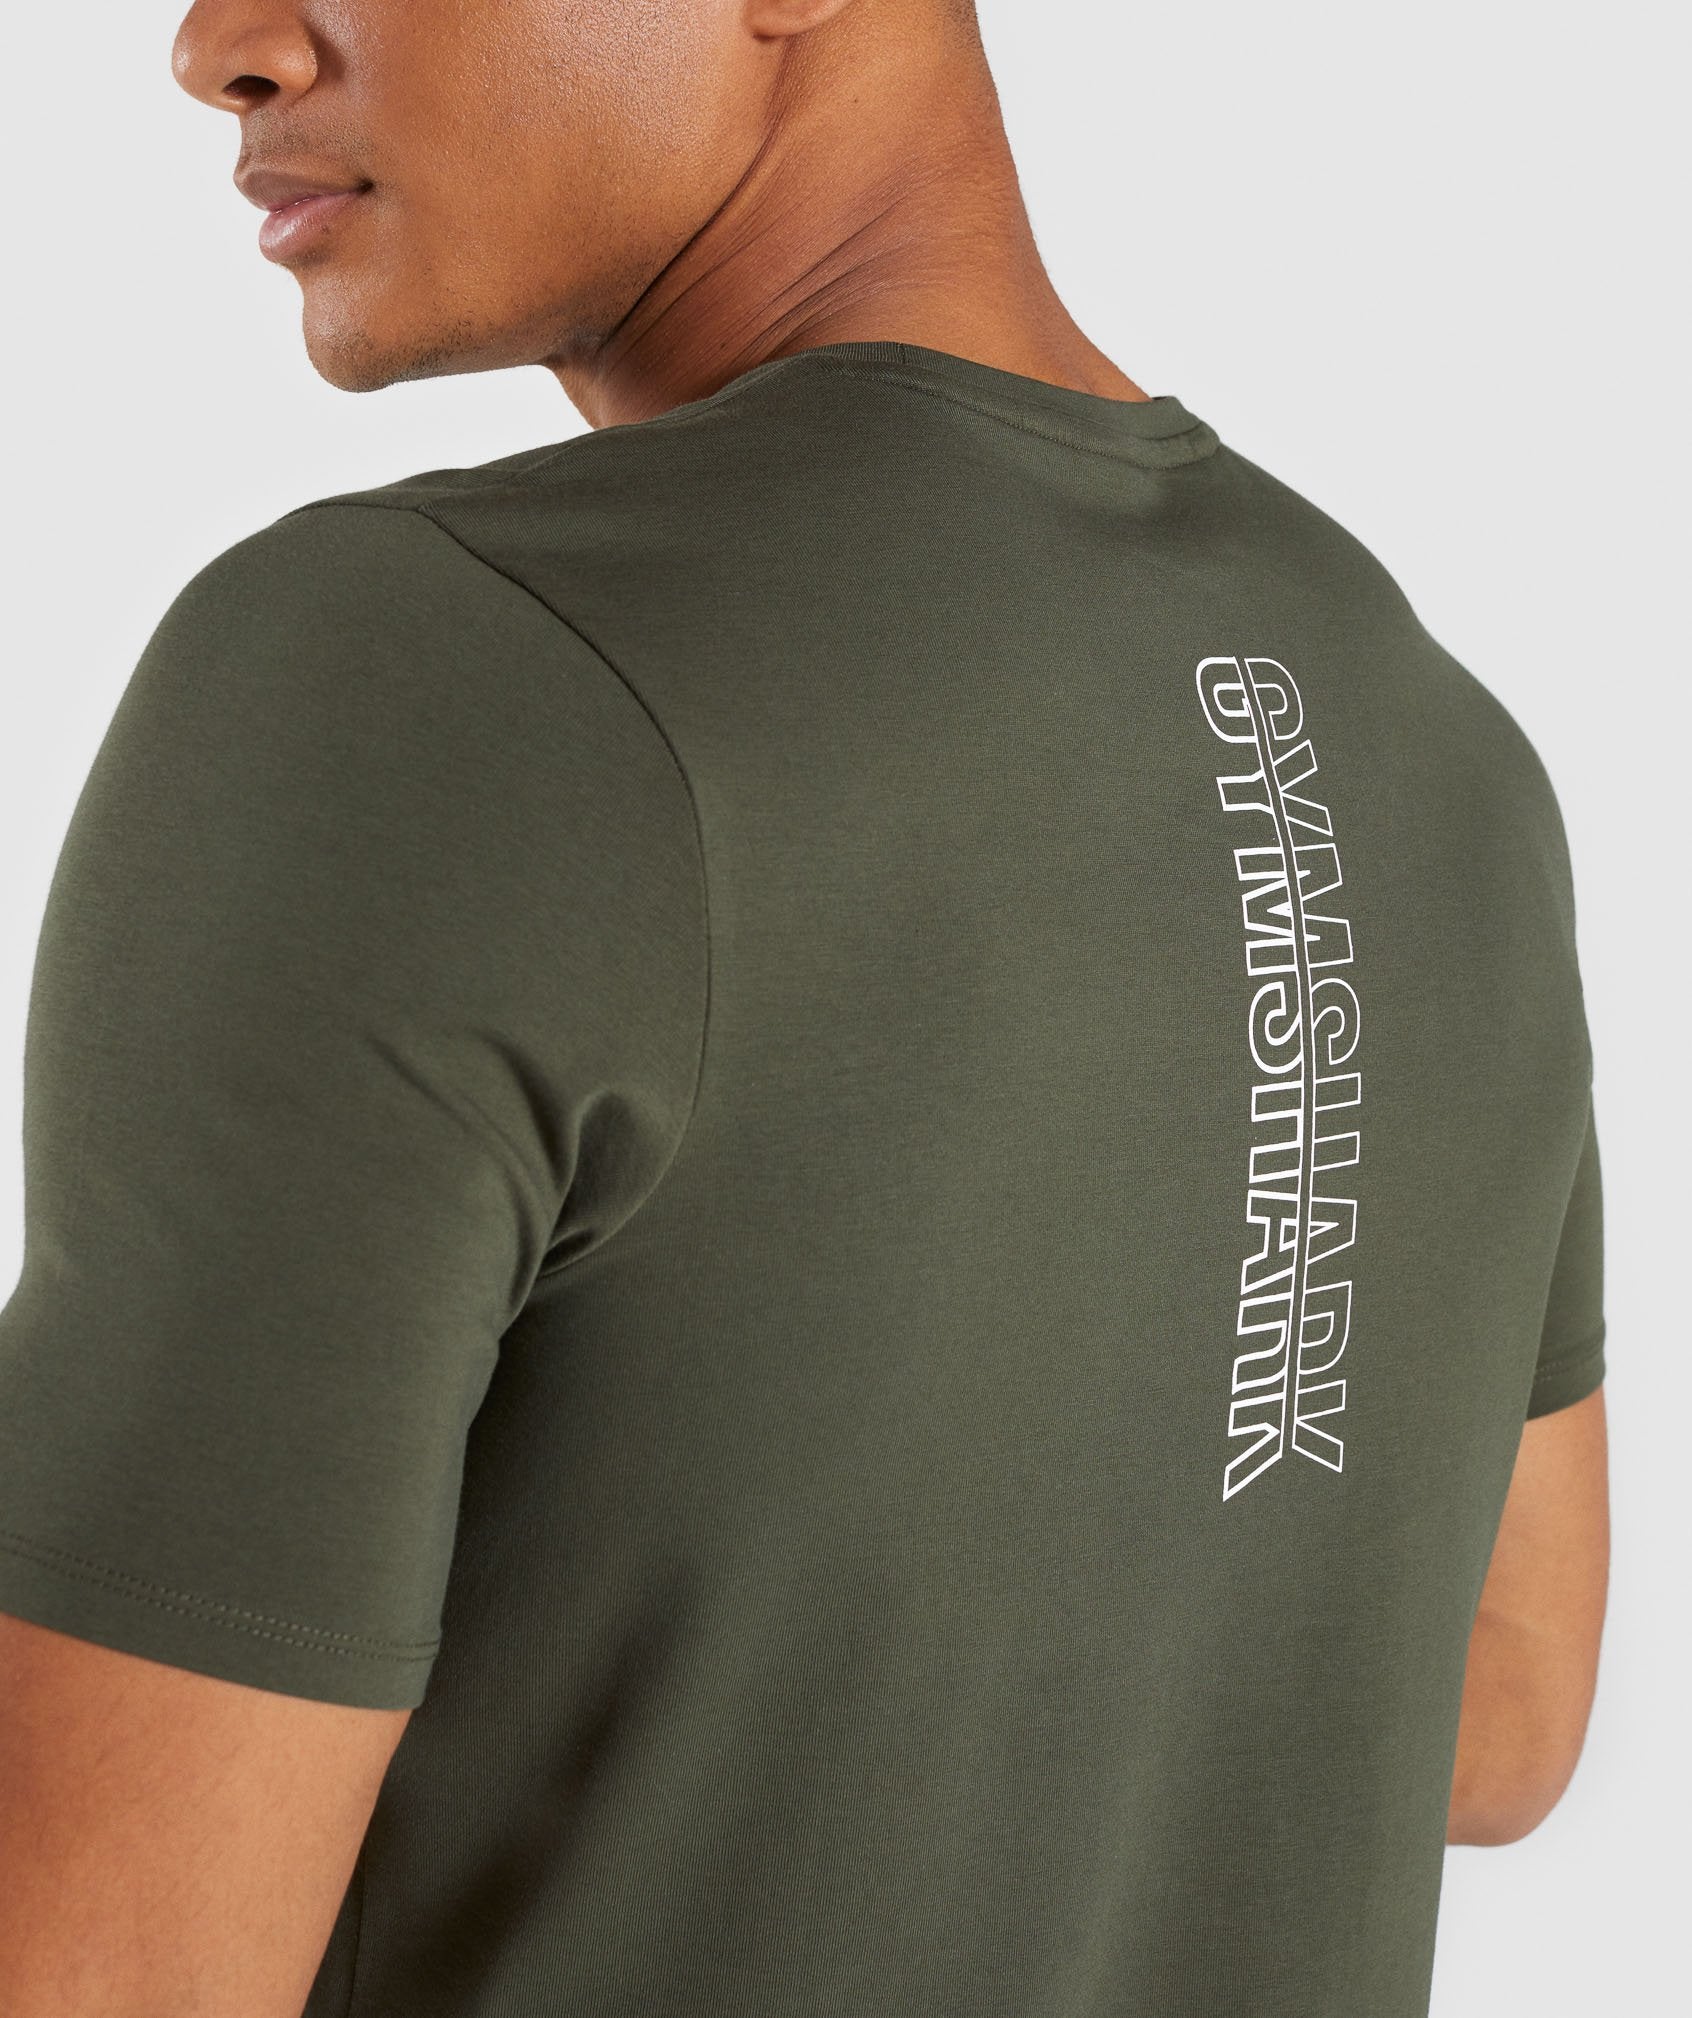 Minimal T-Shirt in Woodland Green - view 6